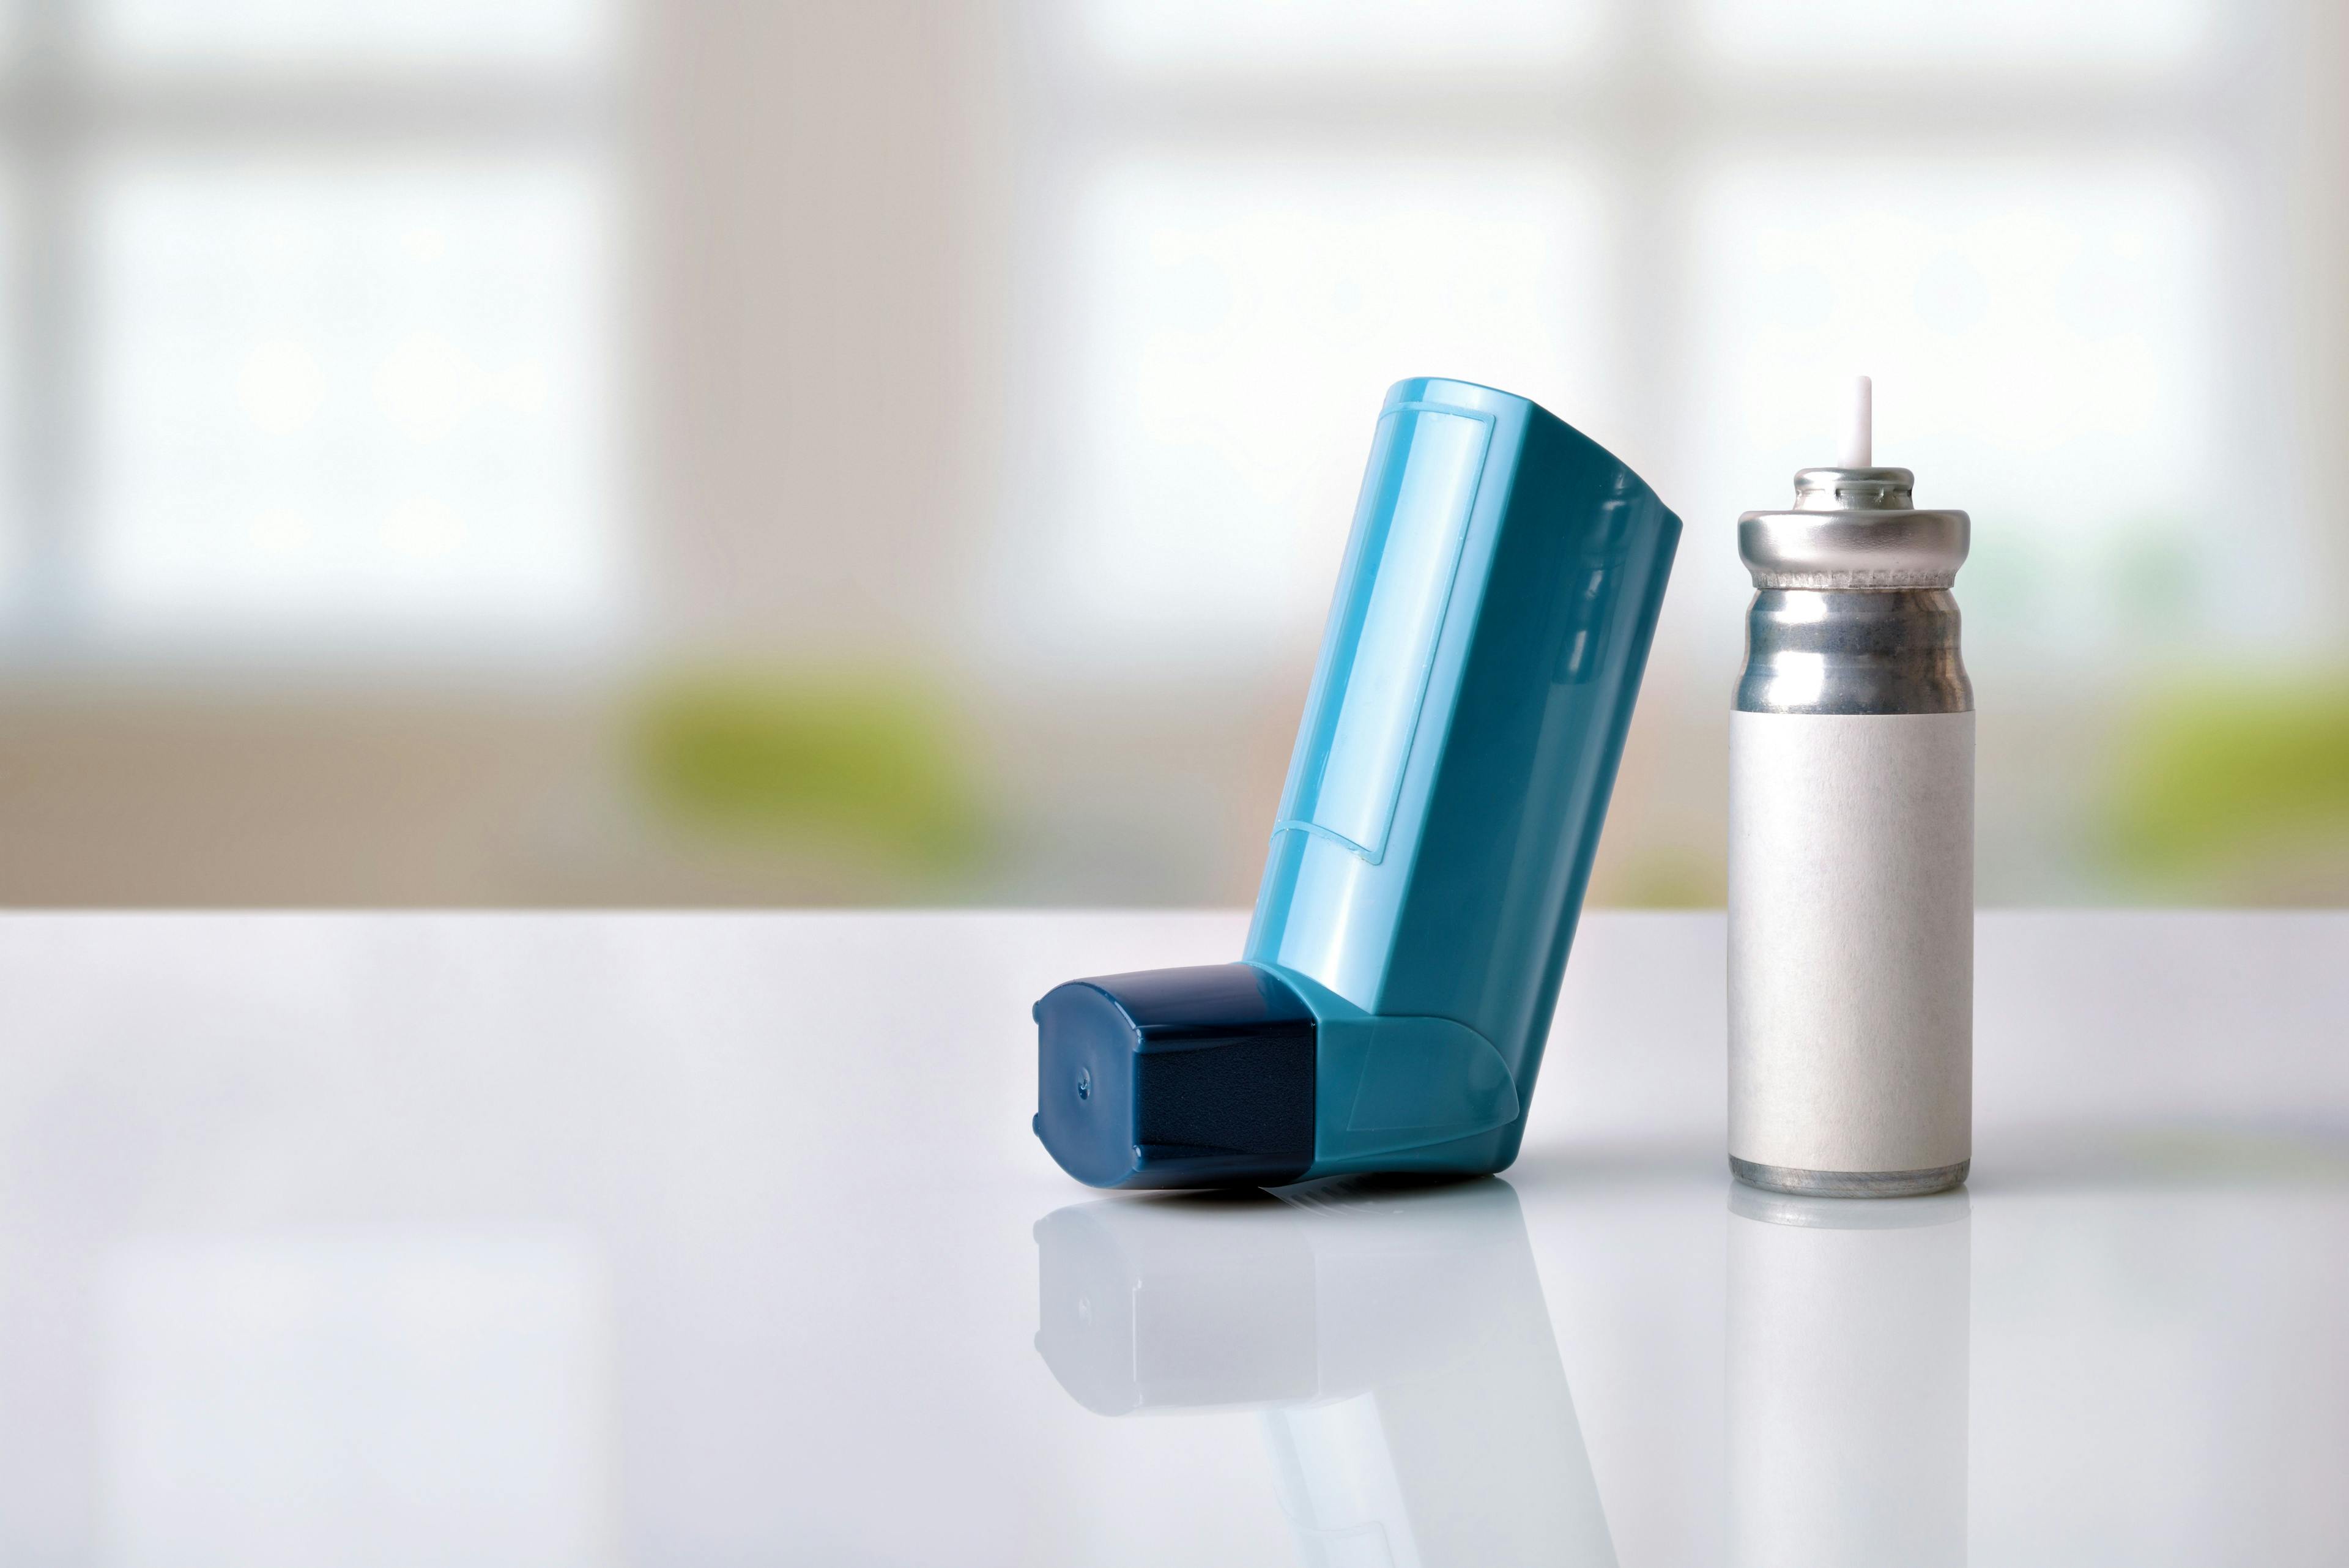 Cartridge and blue medicine inhaler in a room front view | Davizro Photography - stock.adobe.com